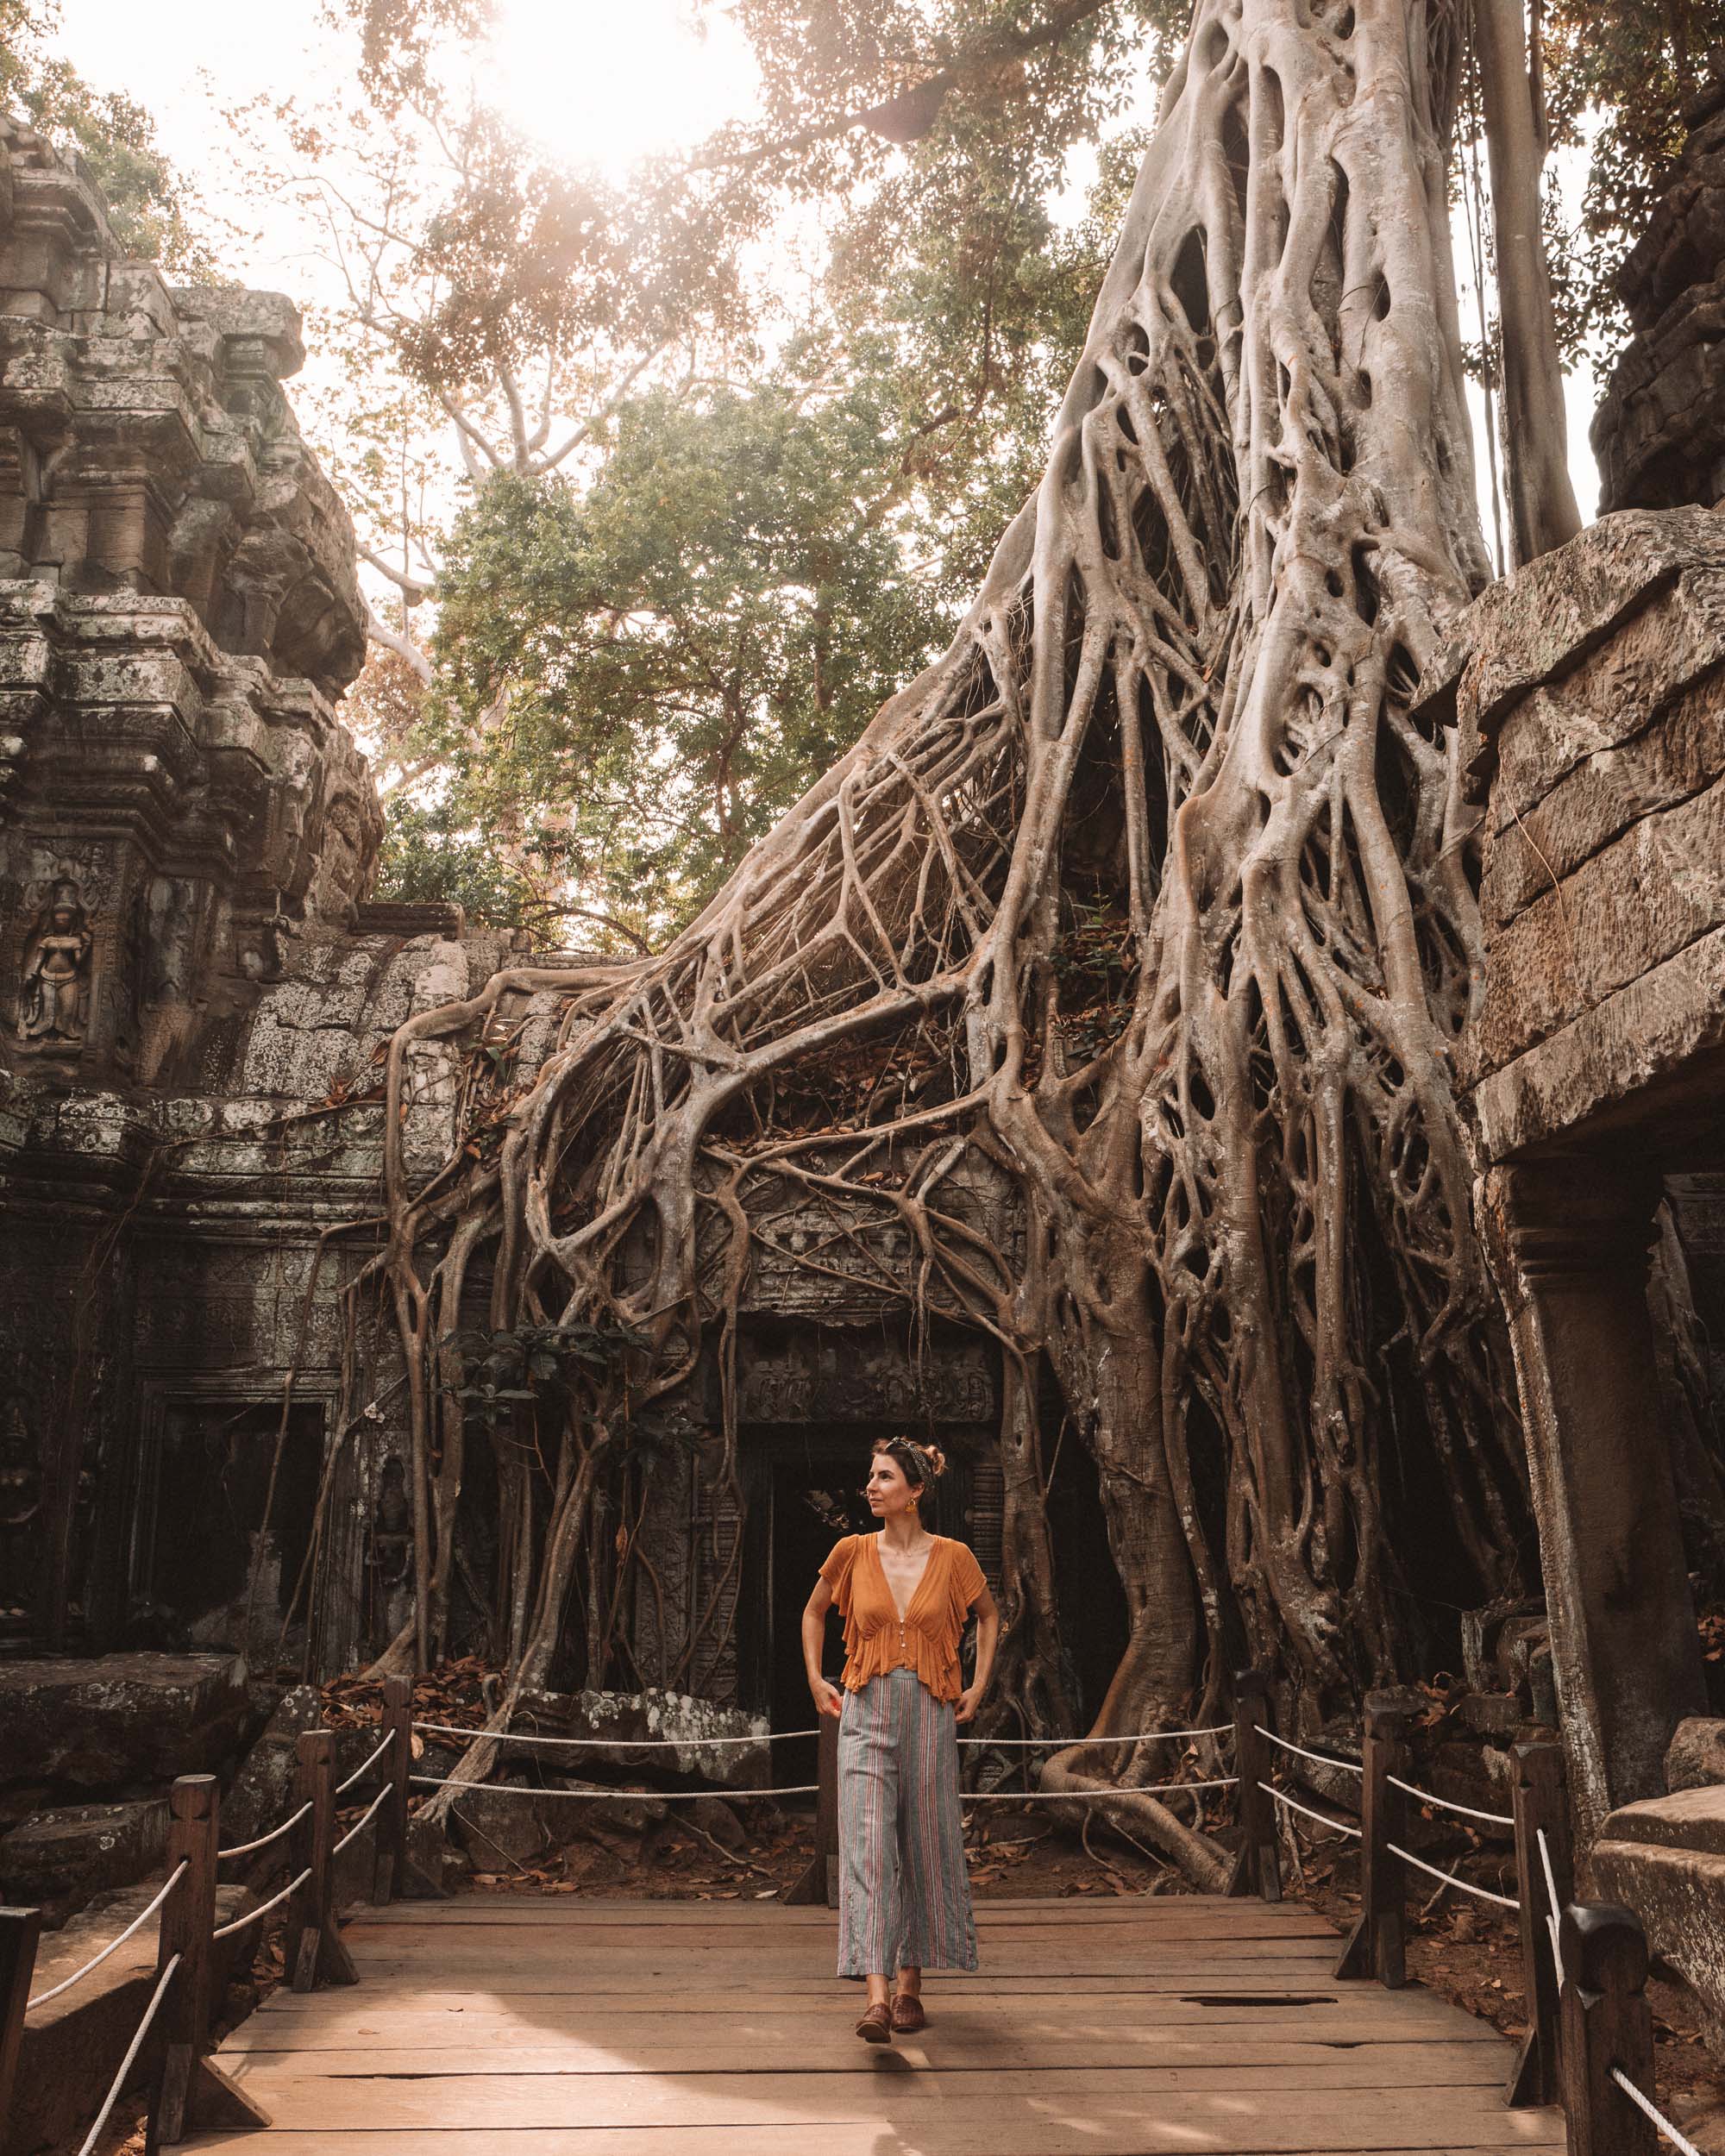 Ta Prohm temple with trees in Angkor Wat Cambodia